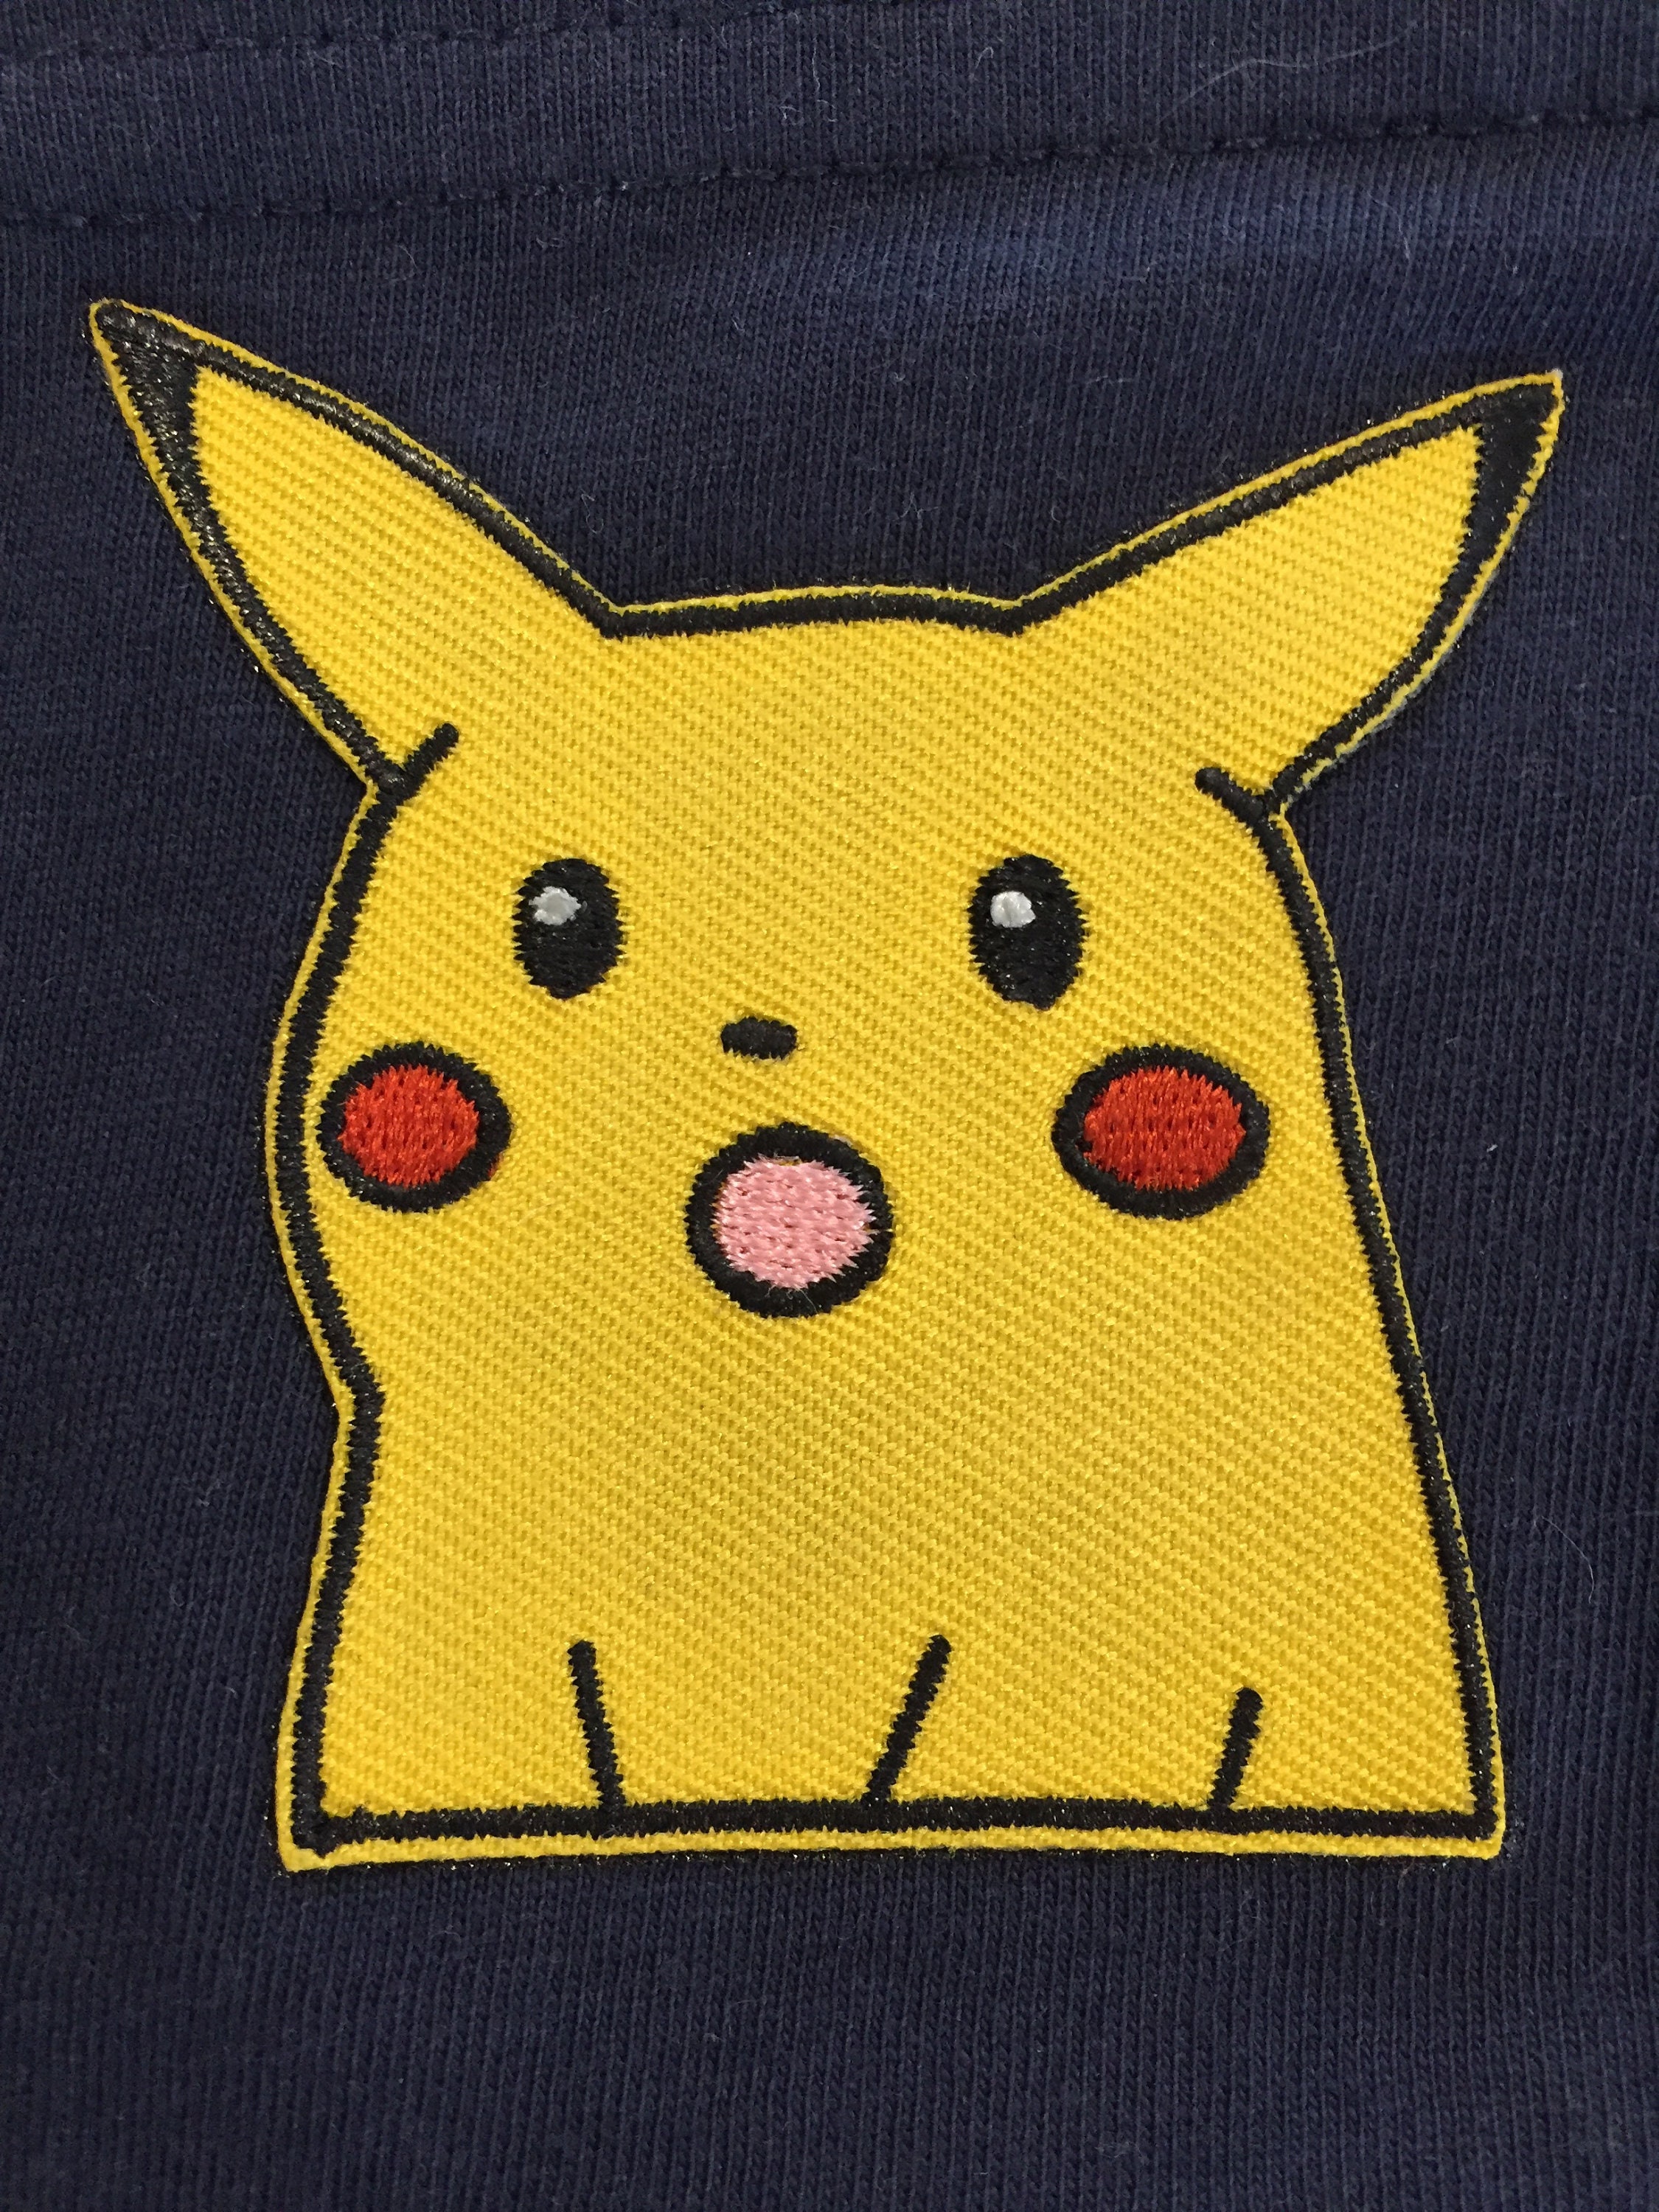 Surprised Pikachu Patch Iron on Patch Patchgame Pokemon Embroidered Patch 